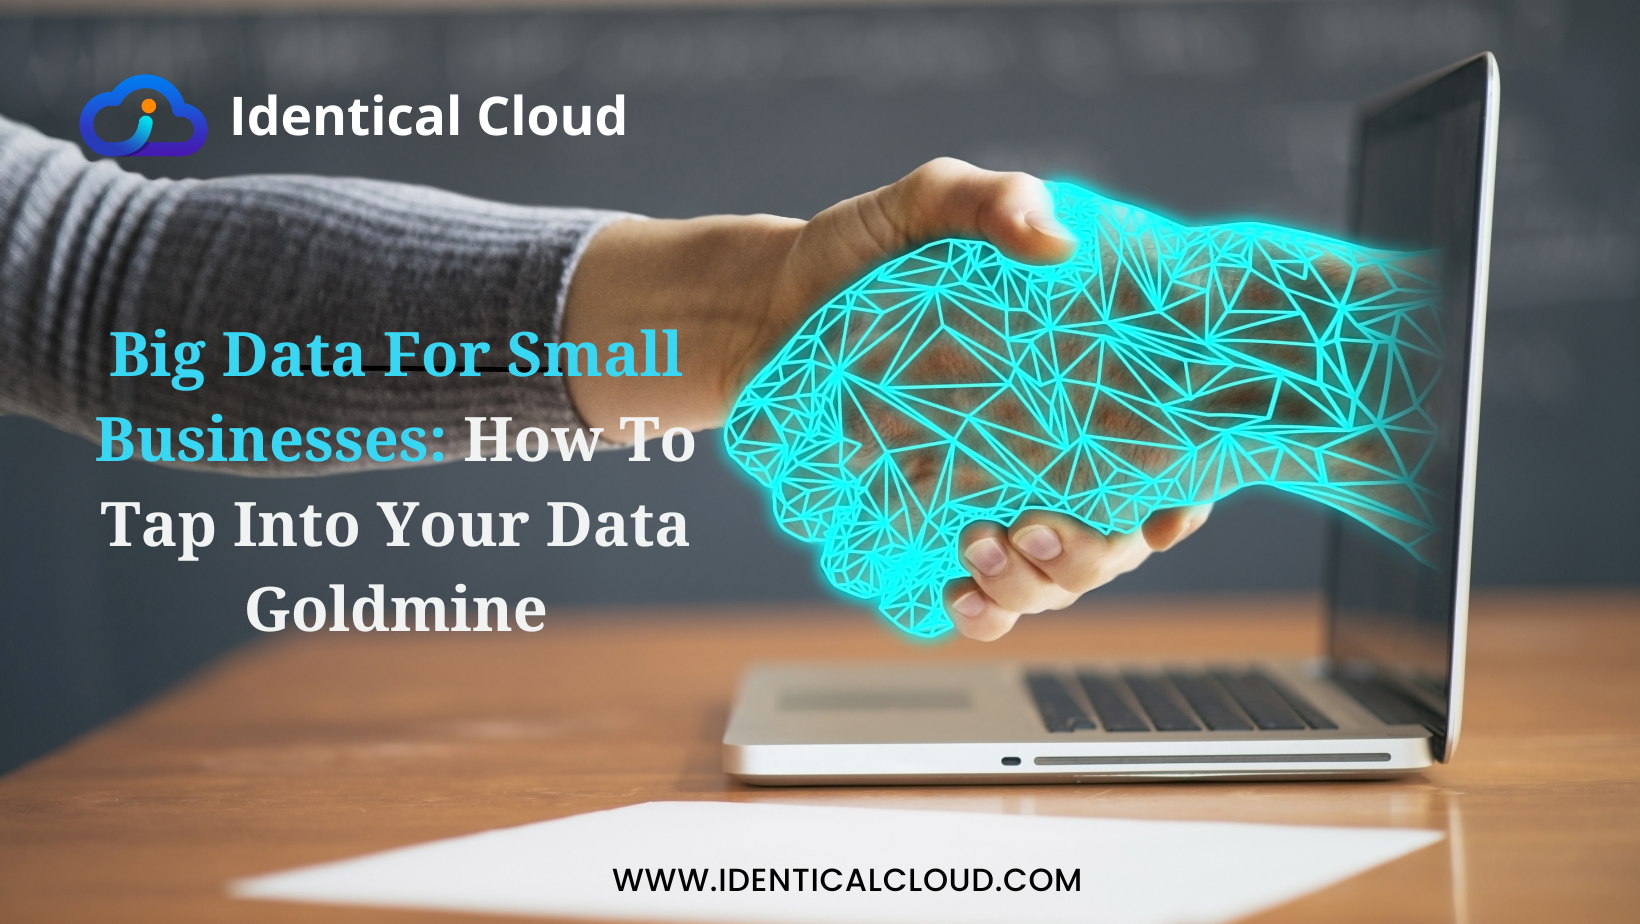 Big Data For Small Businesses: How To Tap Into Your Data Goldmine - identicalcloud.com